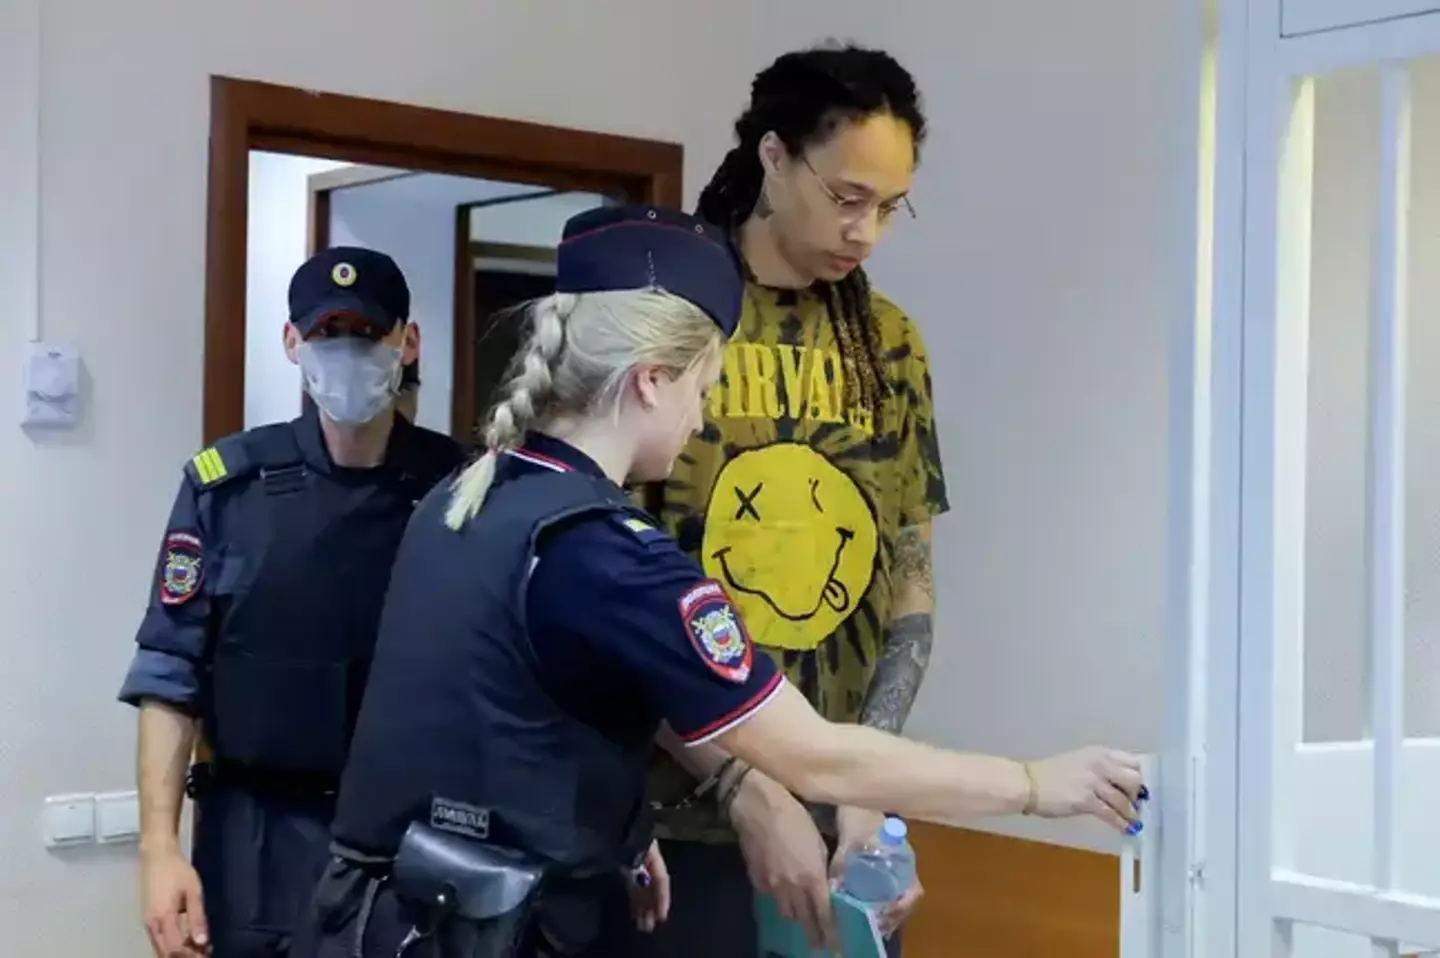 Griner will spend nine years in prison.